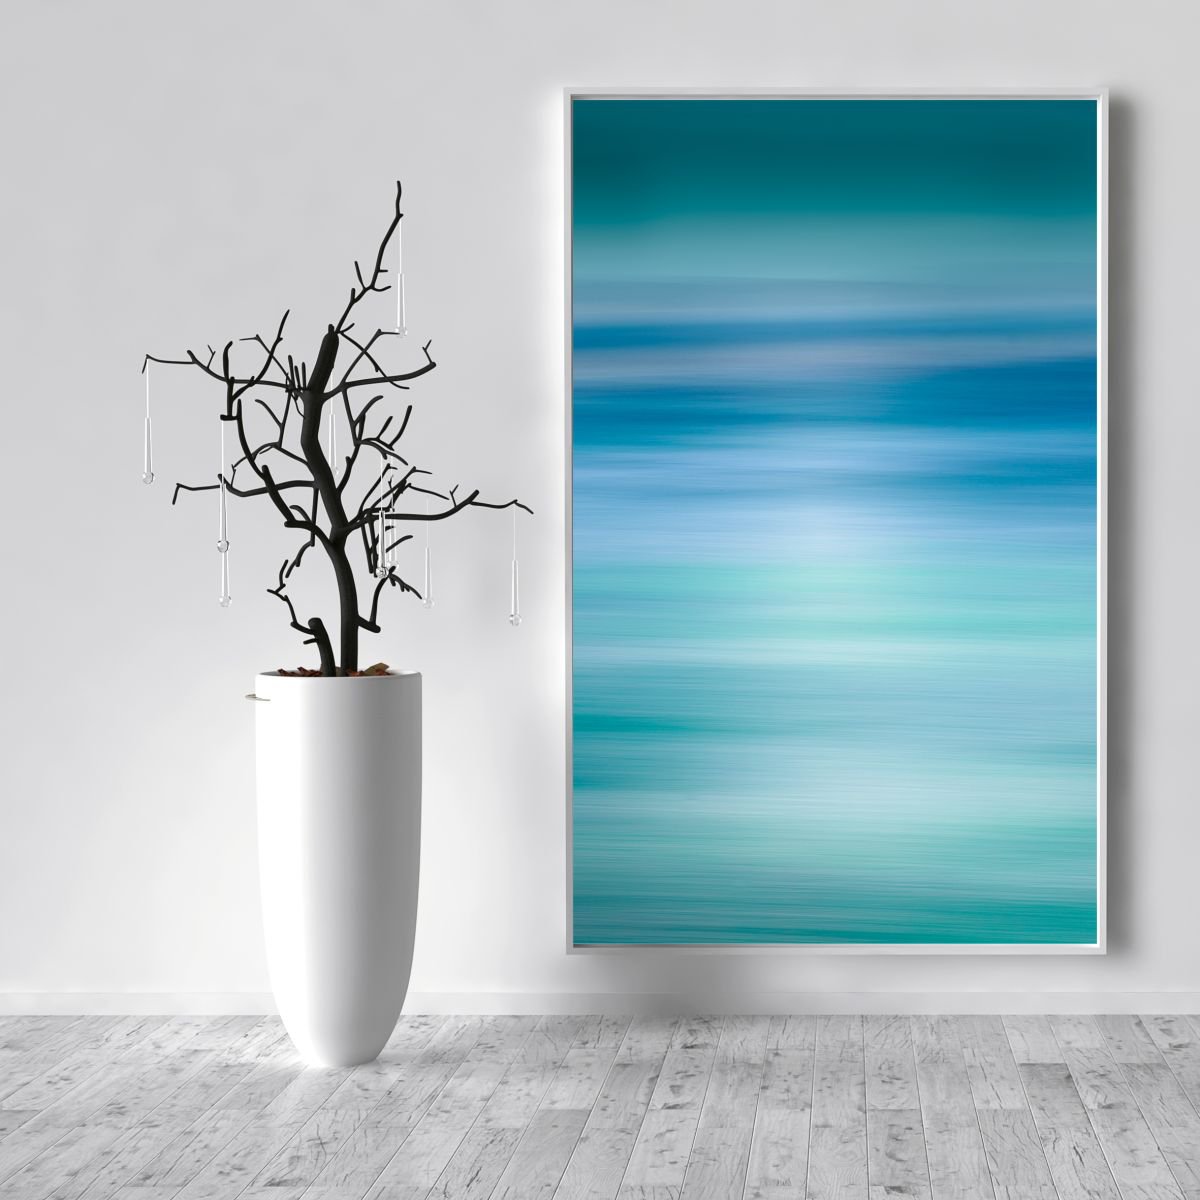 Everlasting Extra large canvas in beautiful shades of mineral green and blue by Lynne Douglas